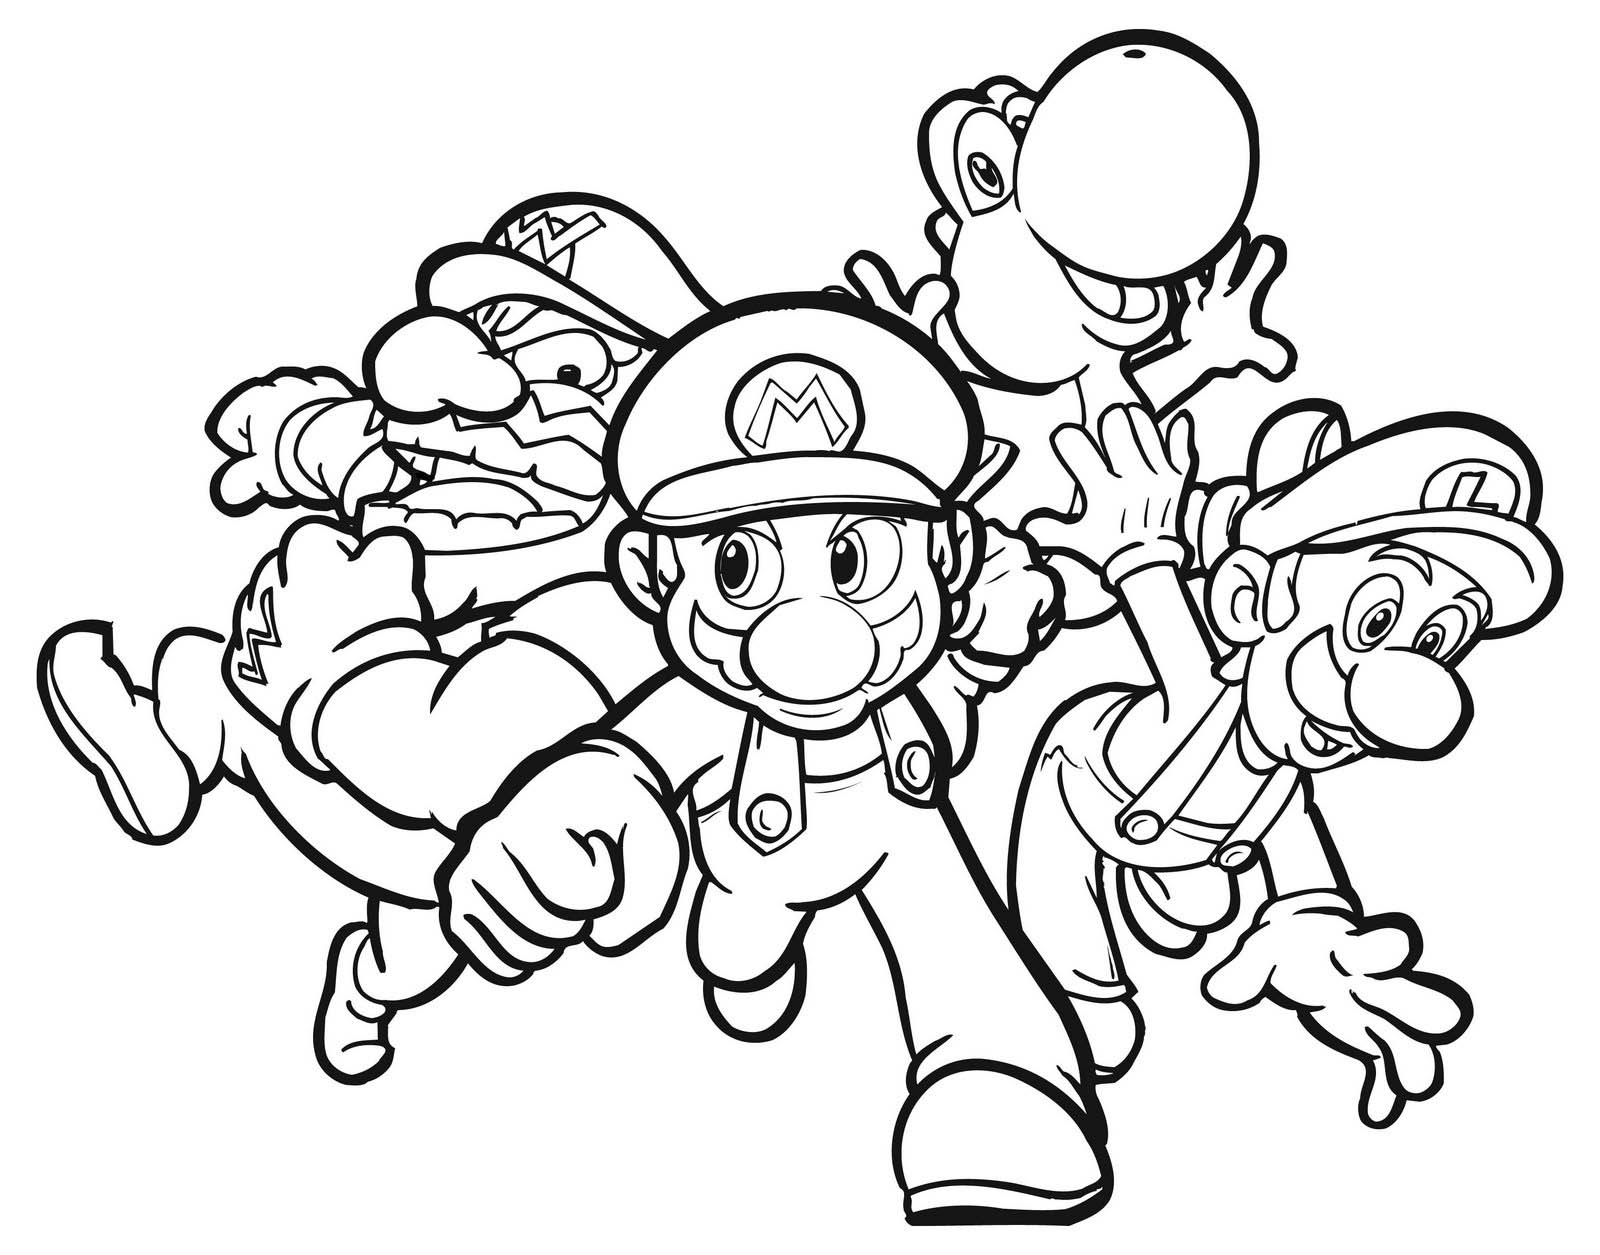 Super Mario Coloring Pages   Best Coloring Pages For Kids